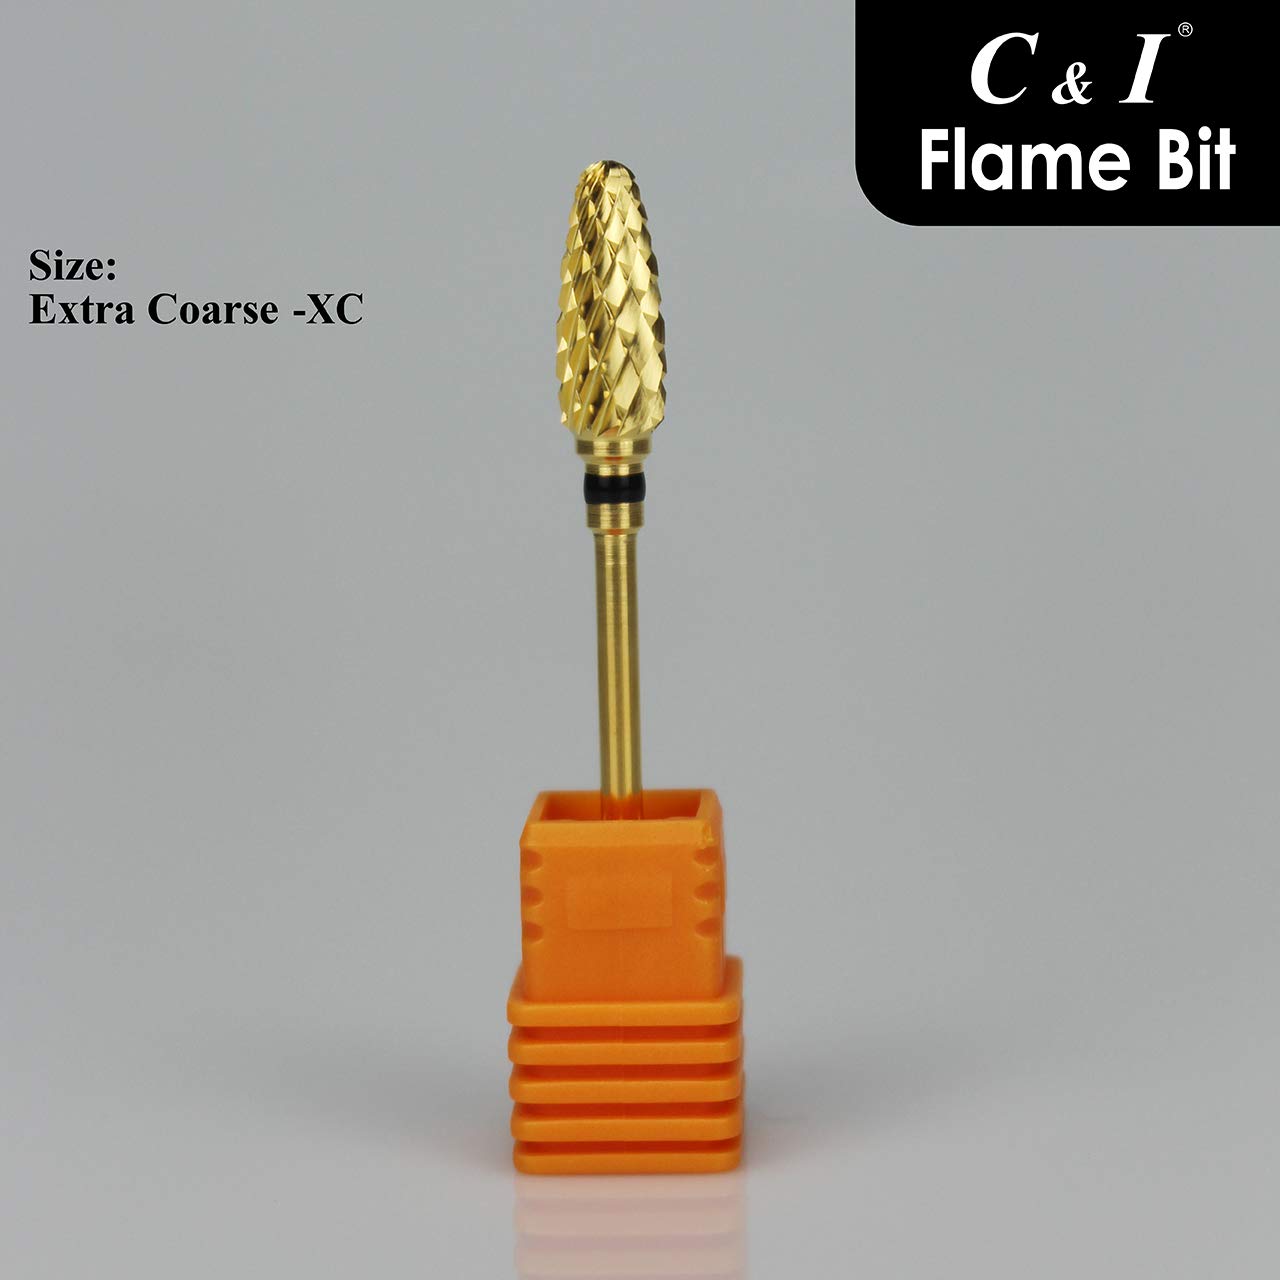 C & I Flame Bit Carbide Nail Drill for Electric Manciure Drill Machine of Nail Beauty (Extra Coarse -XC, Gold)